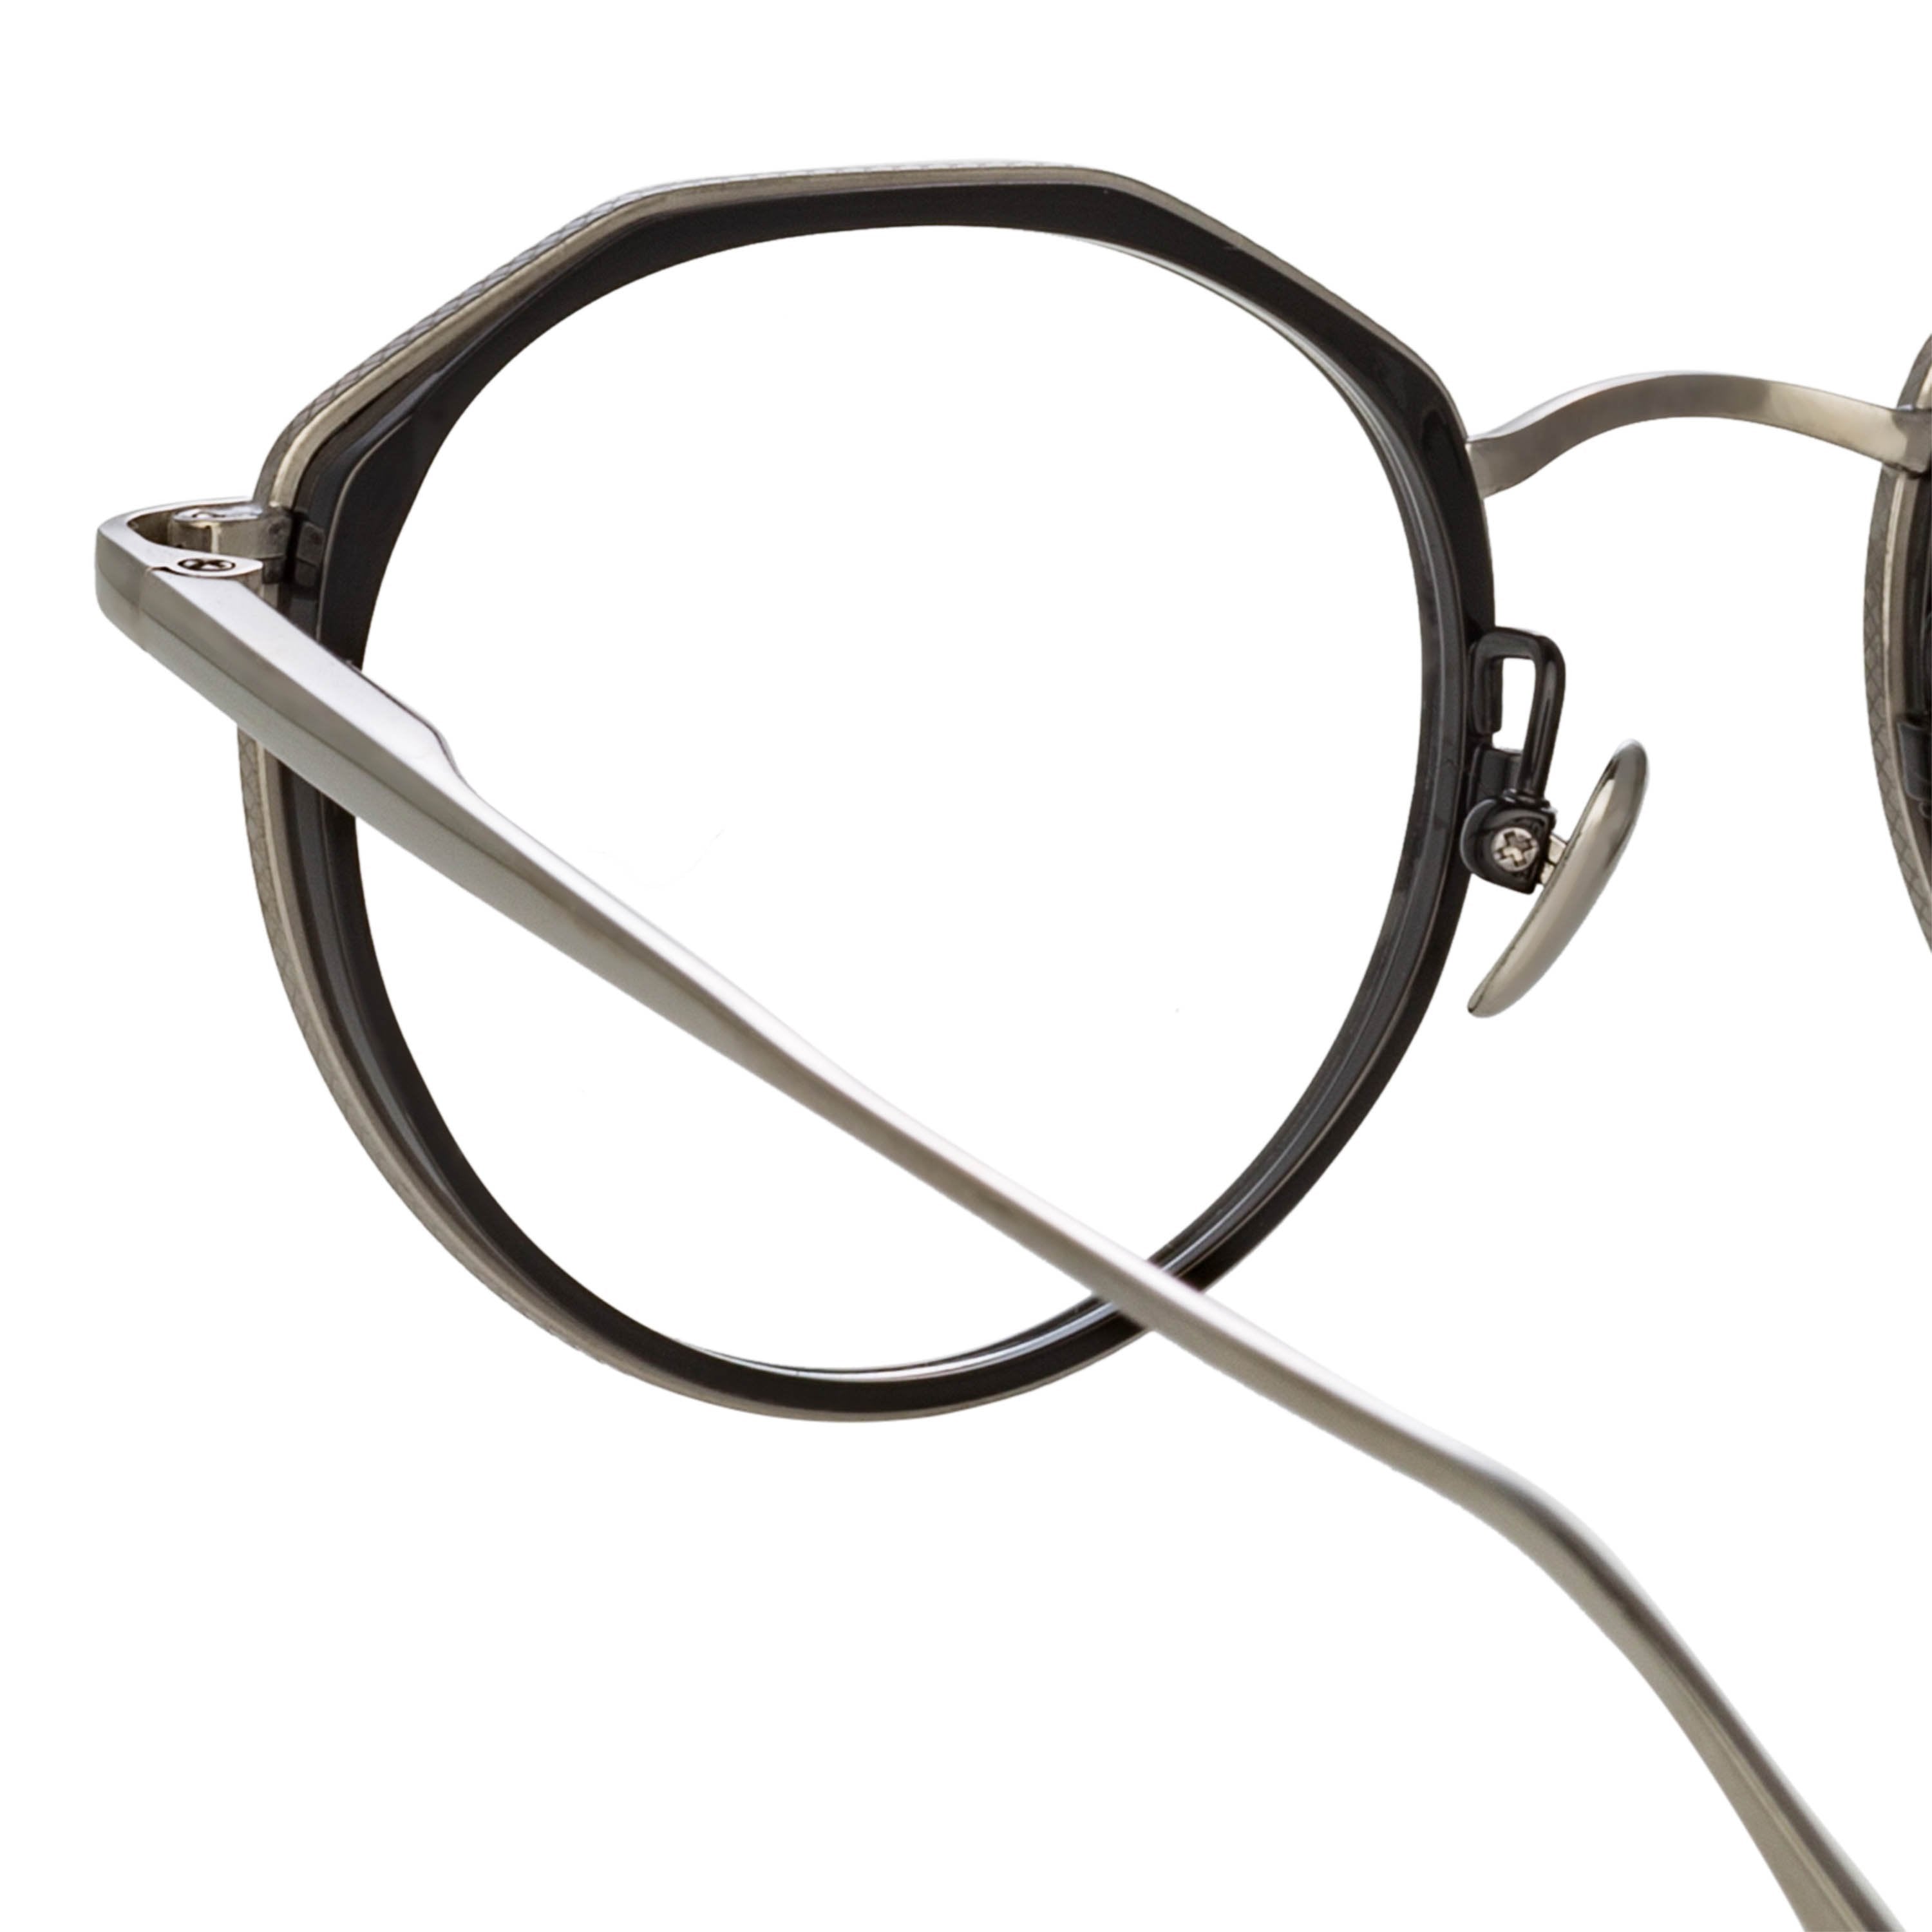 Color_LFL1225C2OPT - Cesar Angular Optical Frame in White Gold and Black